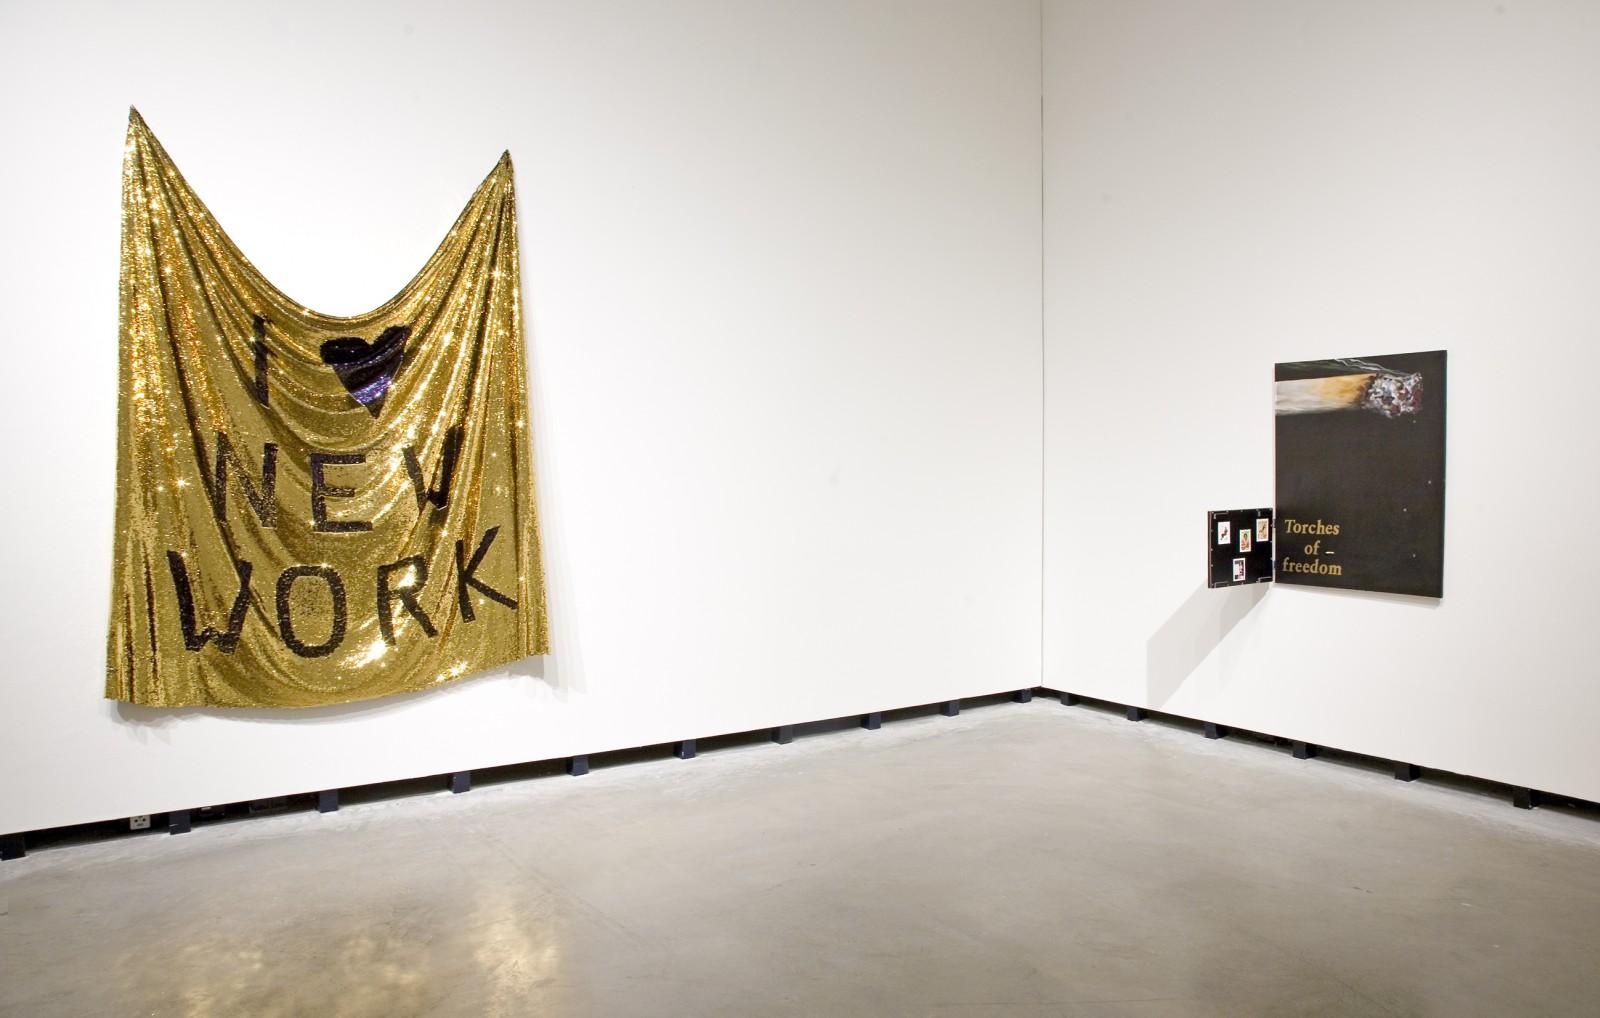 View of the exhibition "Ashes and Gold. A World's Journey", Marta Herford, 2012